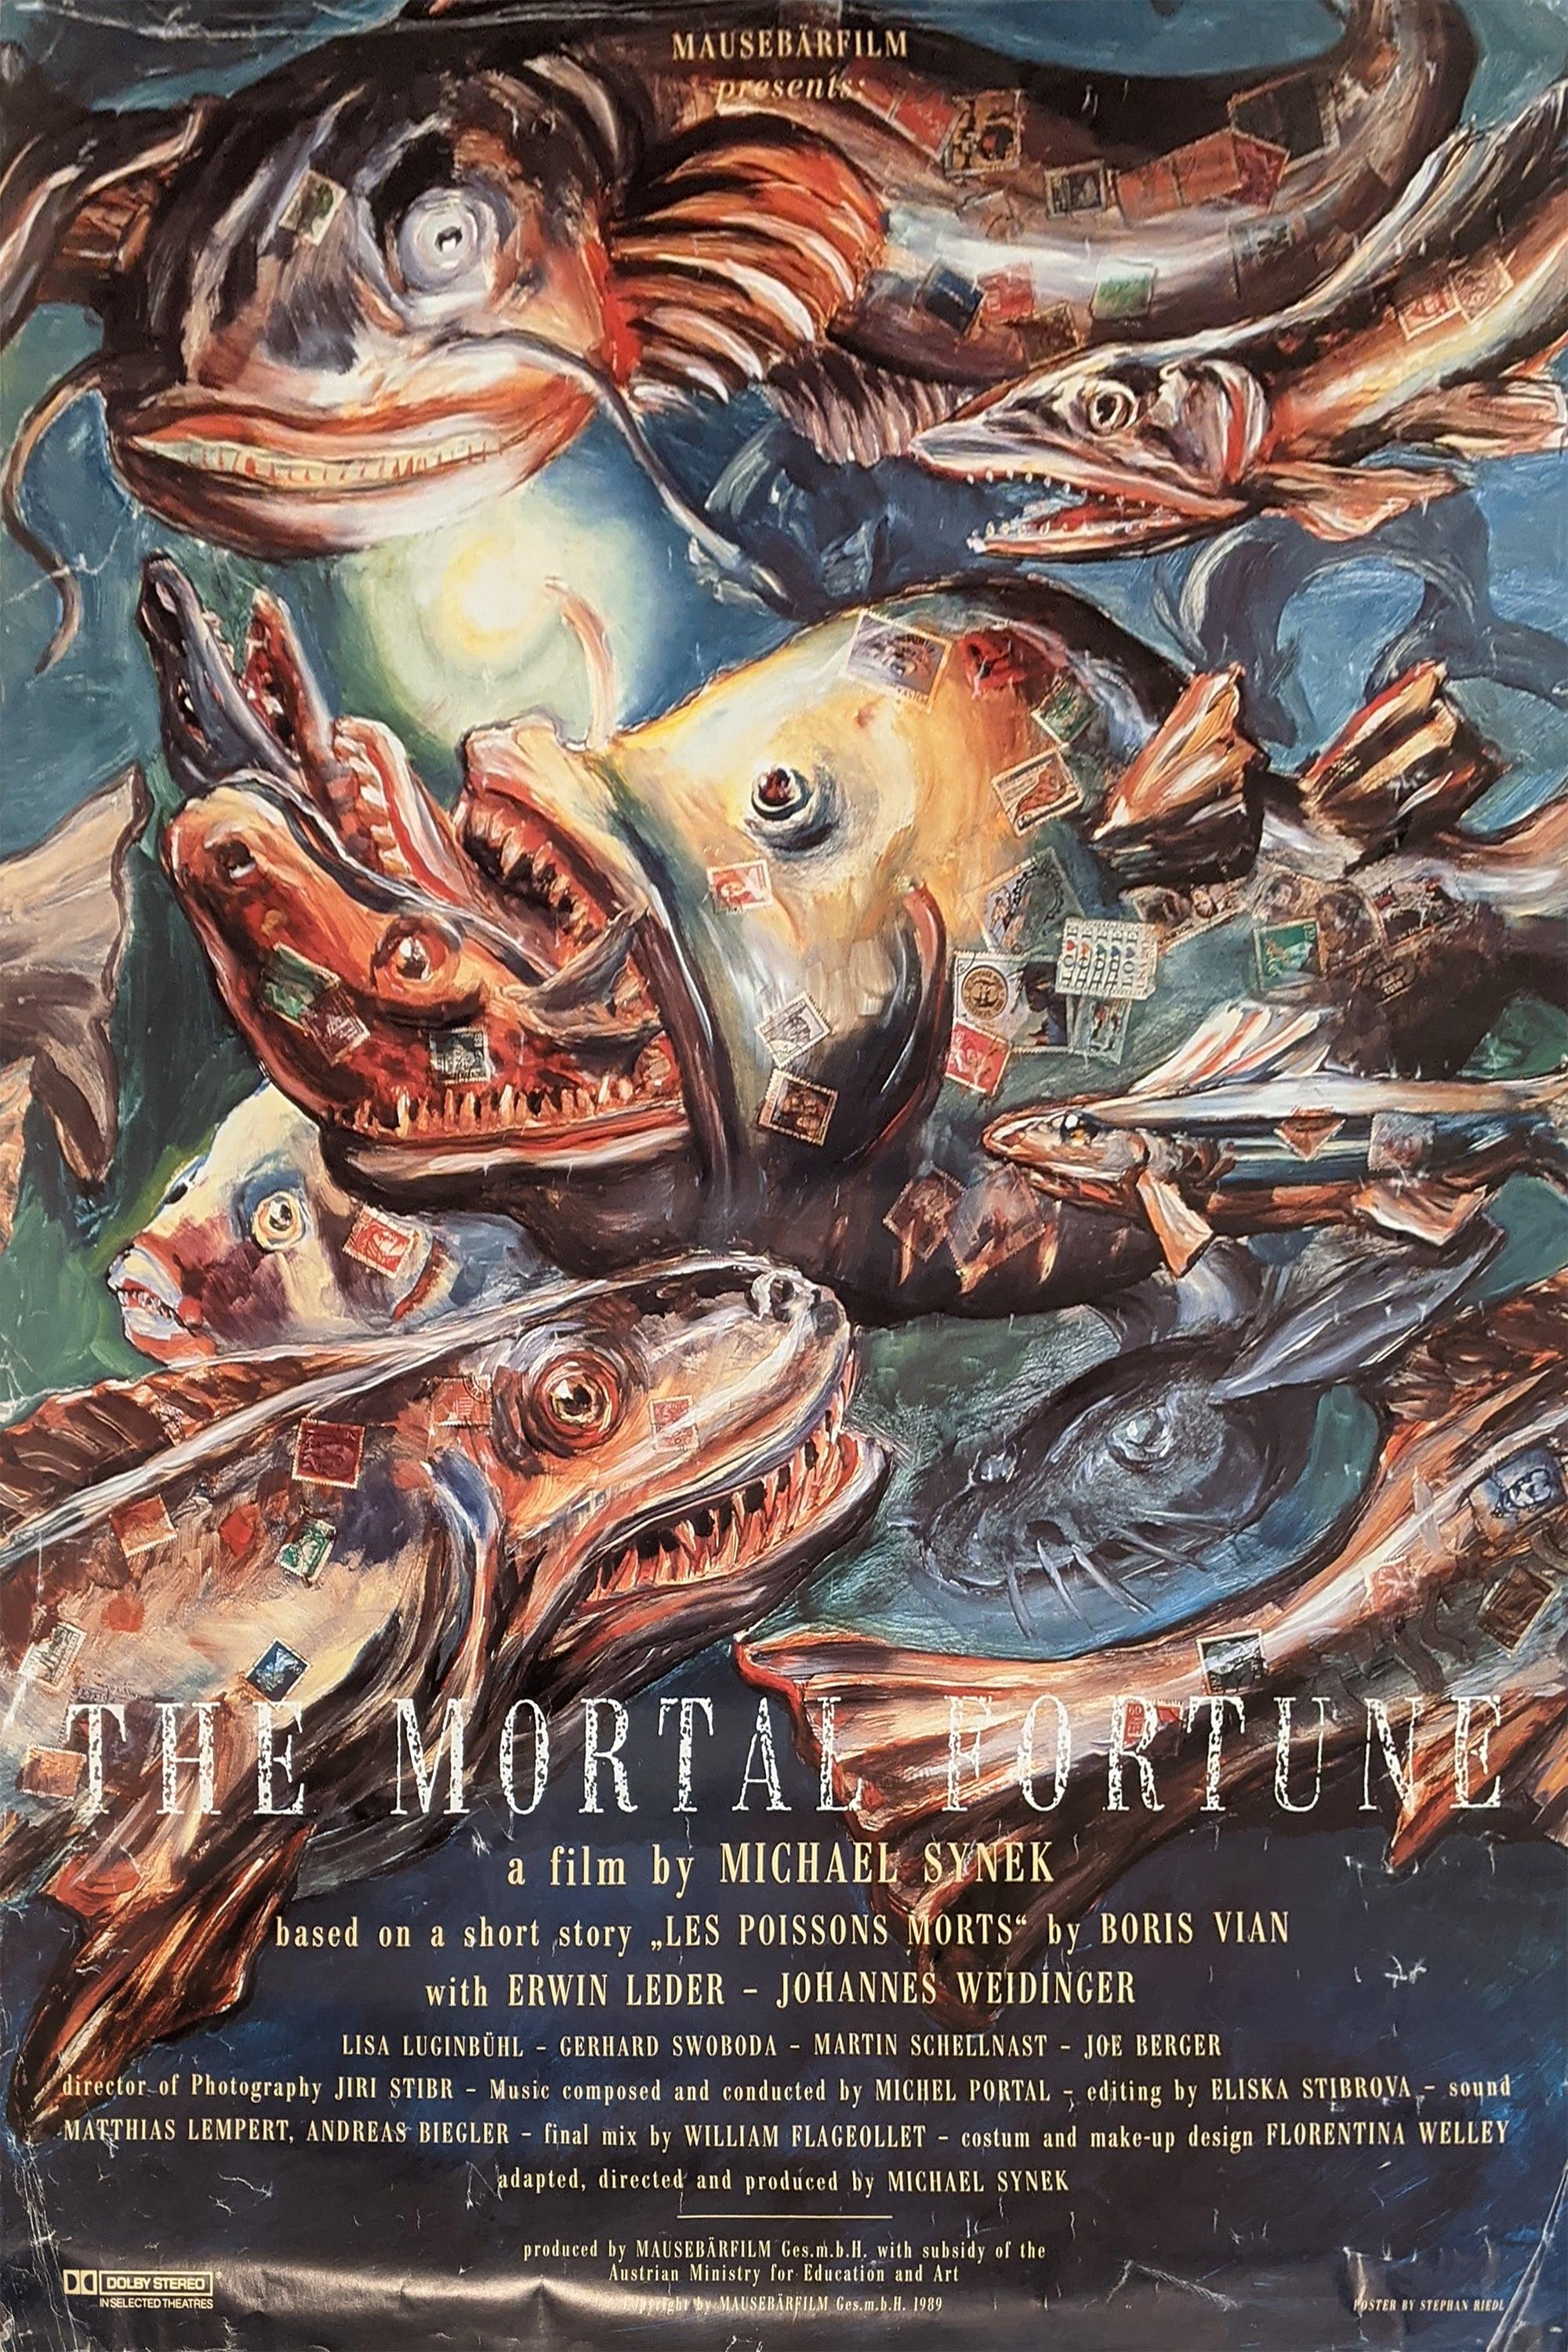 The Mortal Fortune poster